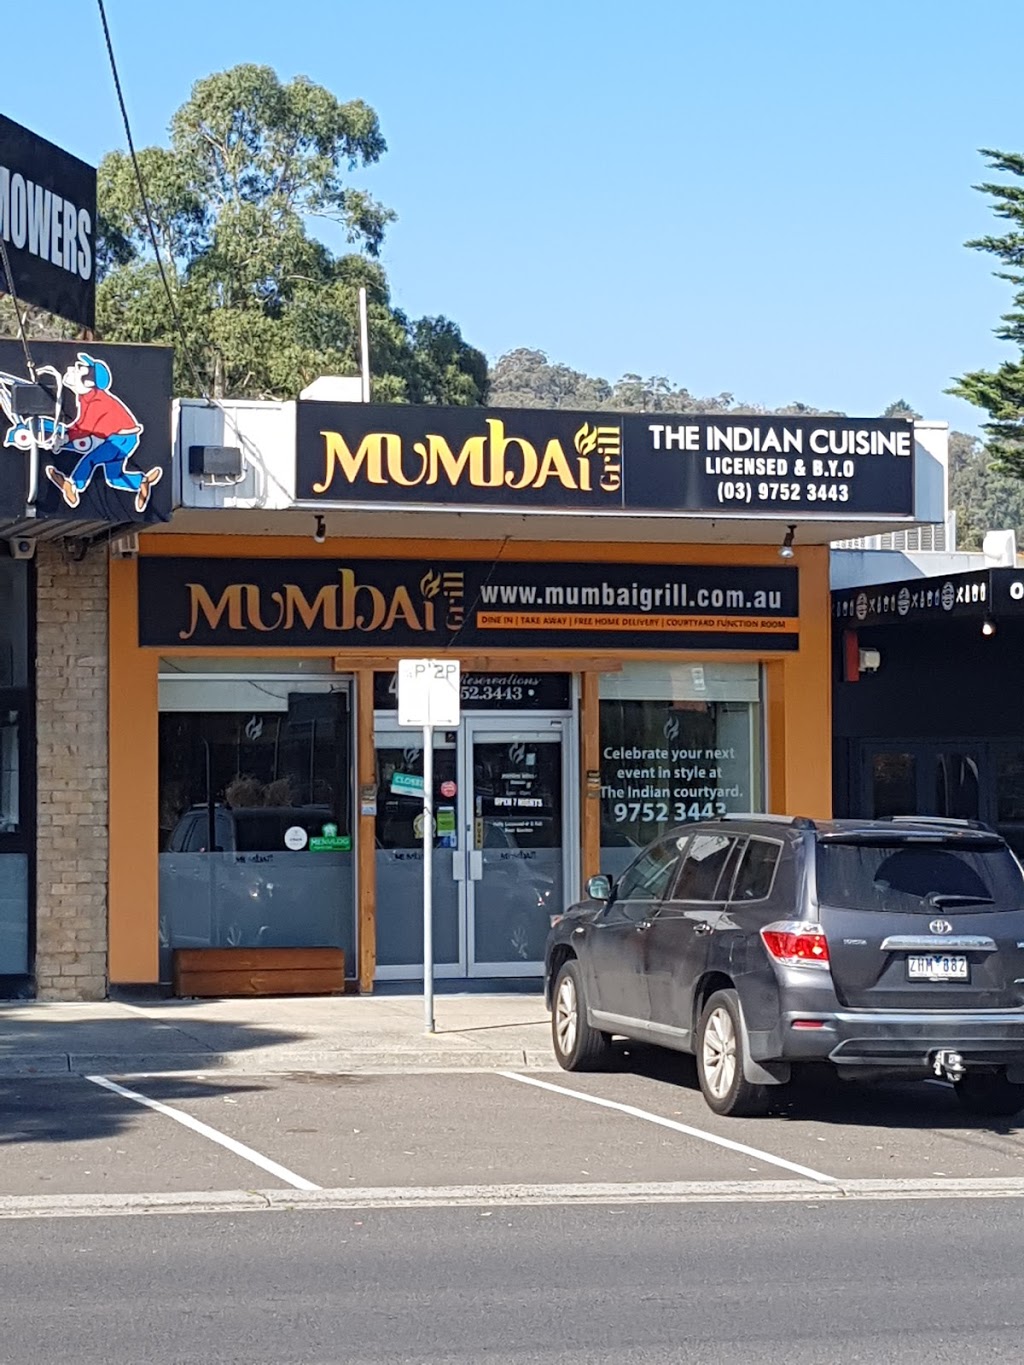 Mumbai Grill the Indian Cuisine | restaurant | 42 Forest Rd, Ferntree Gully VIC 3156, Australia | 0397523443 OR +61 3 9752 3443